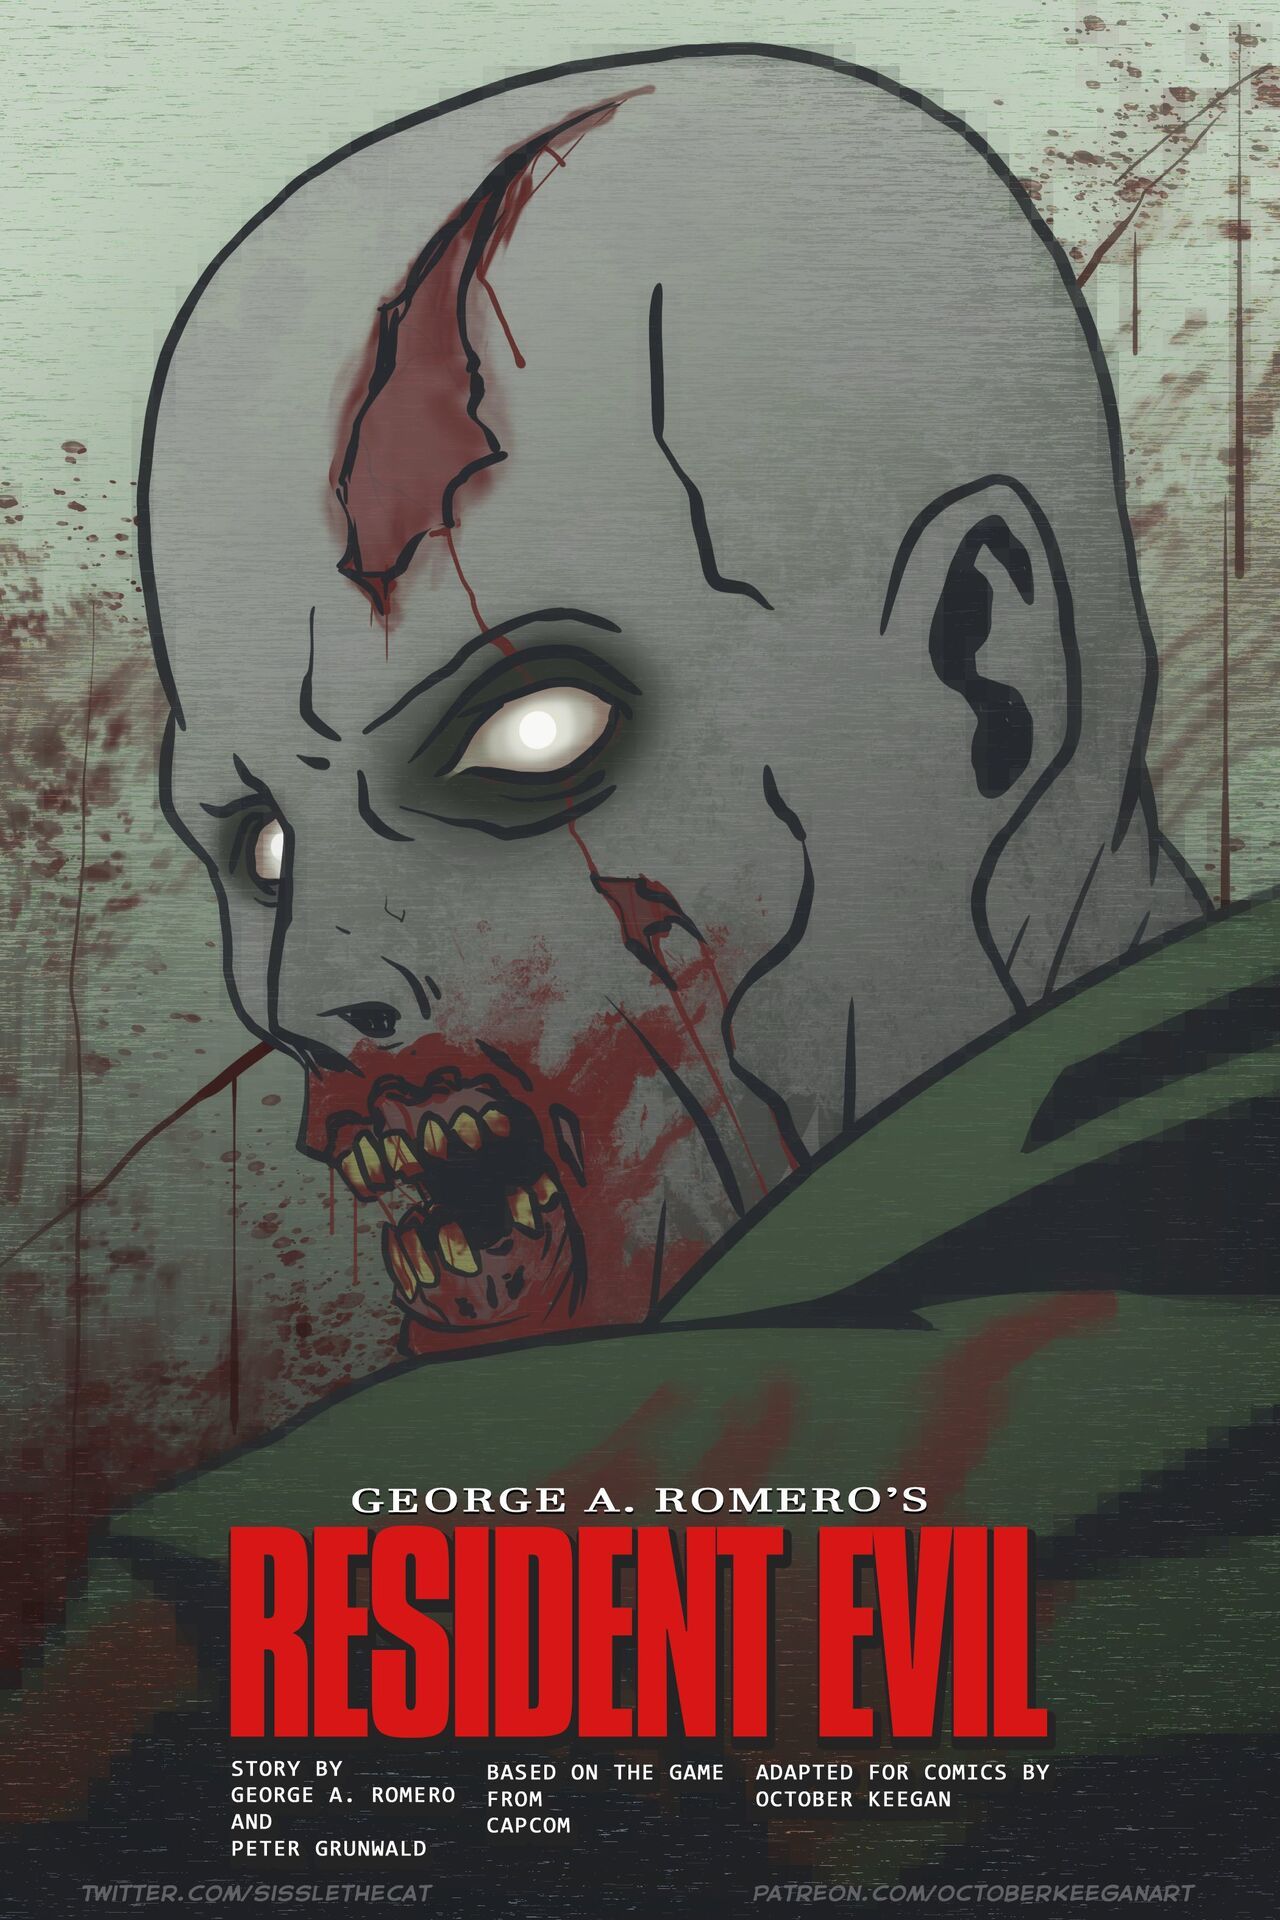 [SISSLETHECAT] George A. Romero's Resident Evil (ongoing) 8